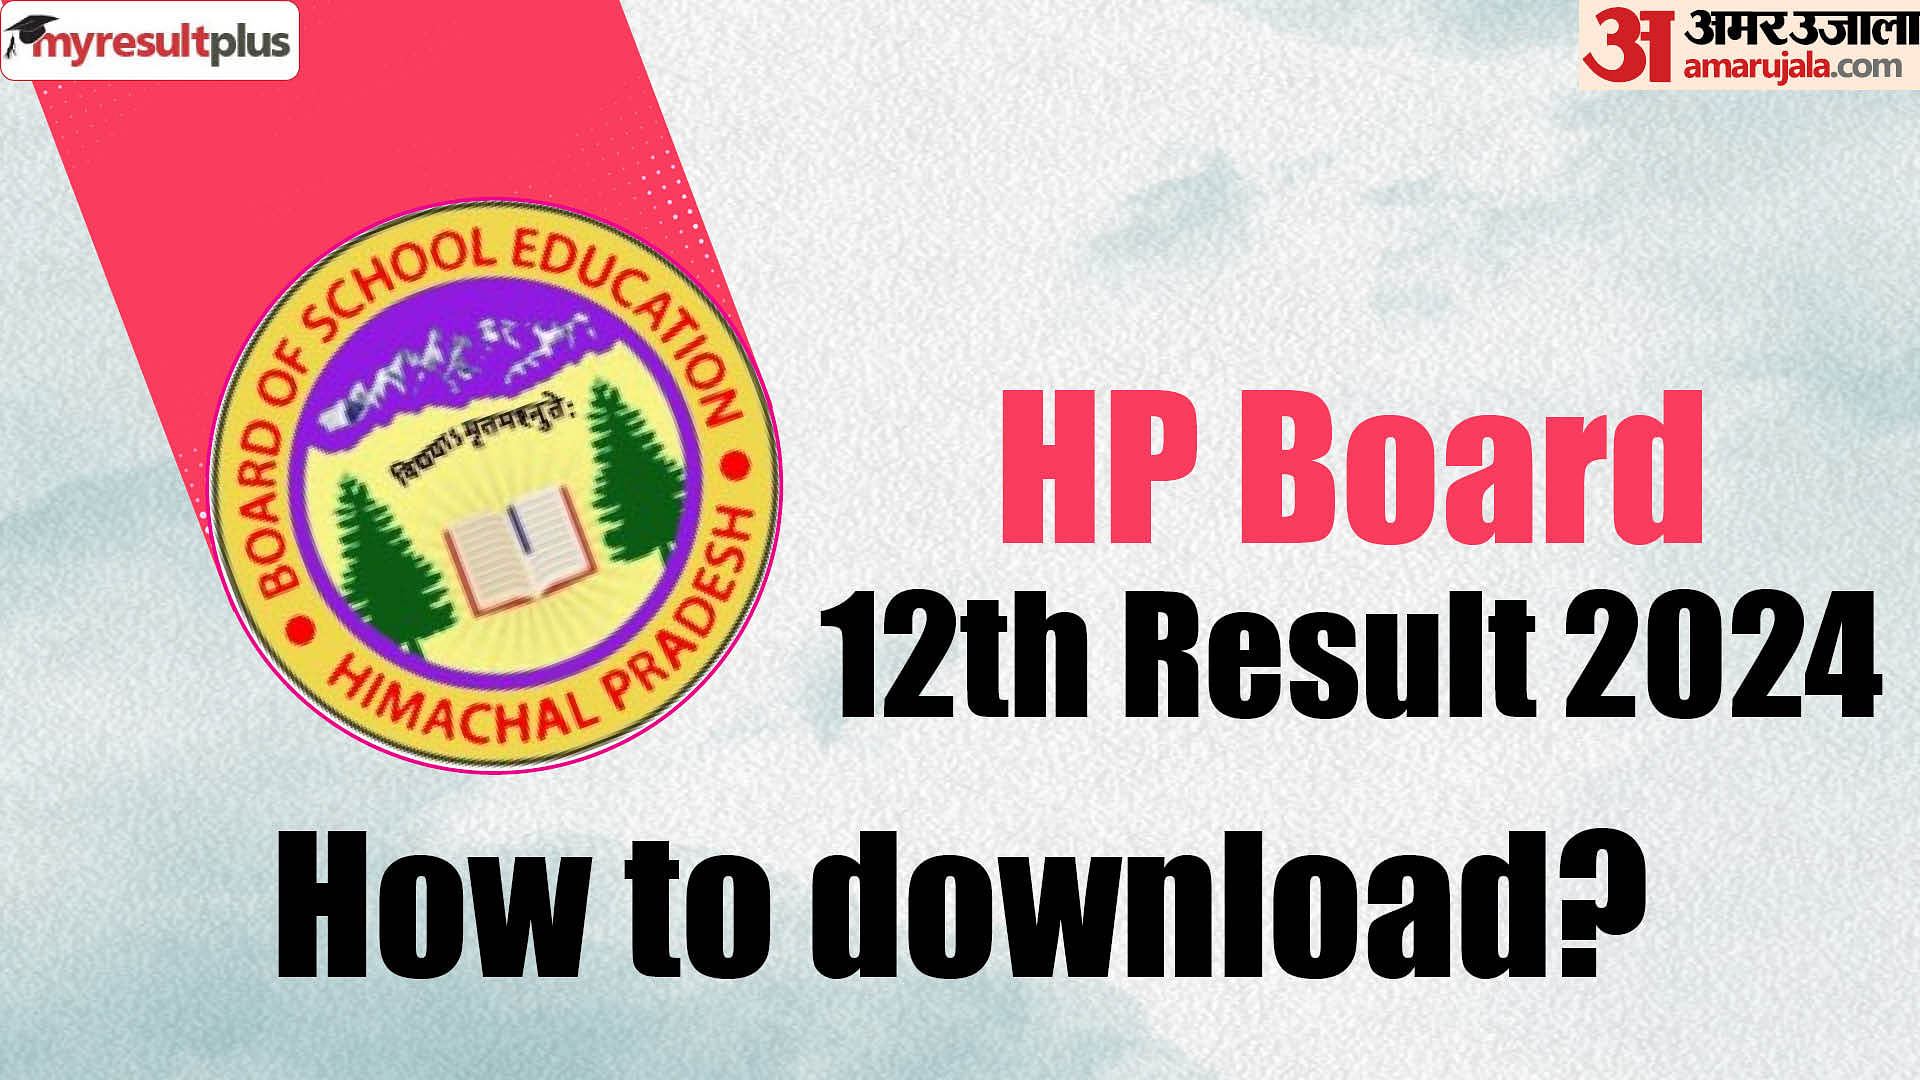 HP board Result 2024 to be declared today, check how to download class 12 result at results.amarujala.com